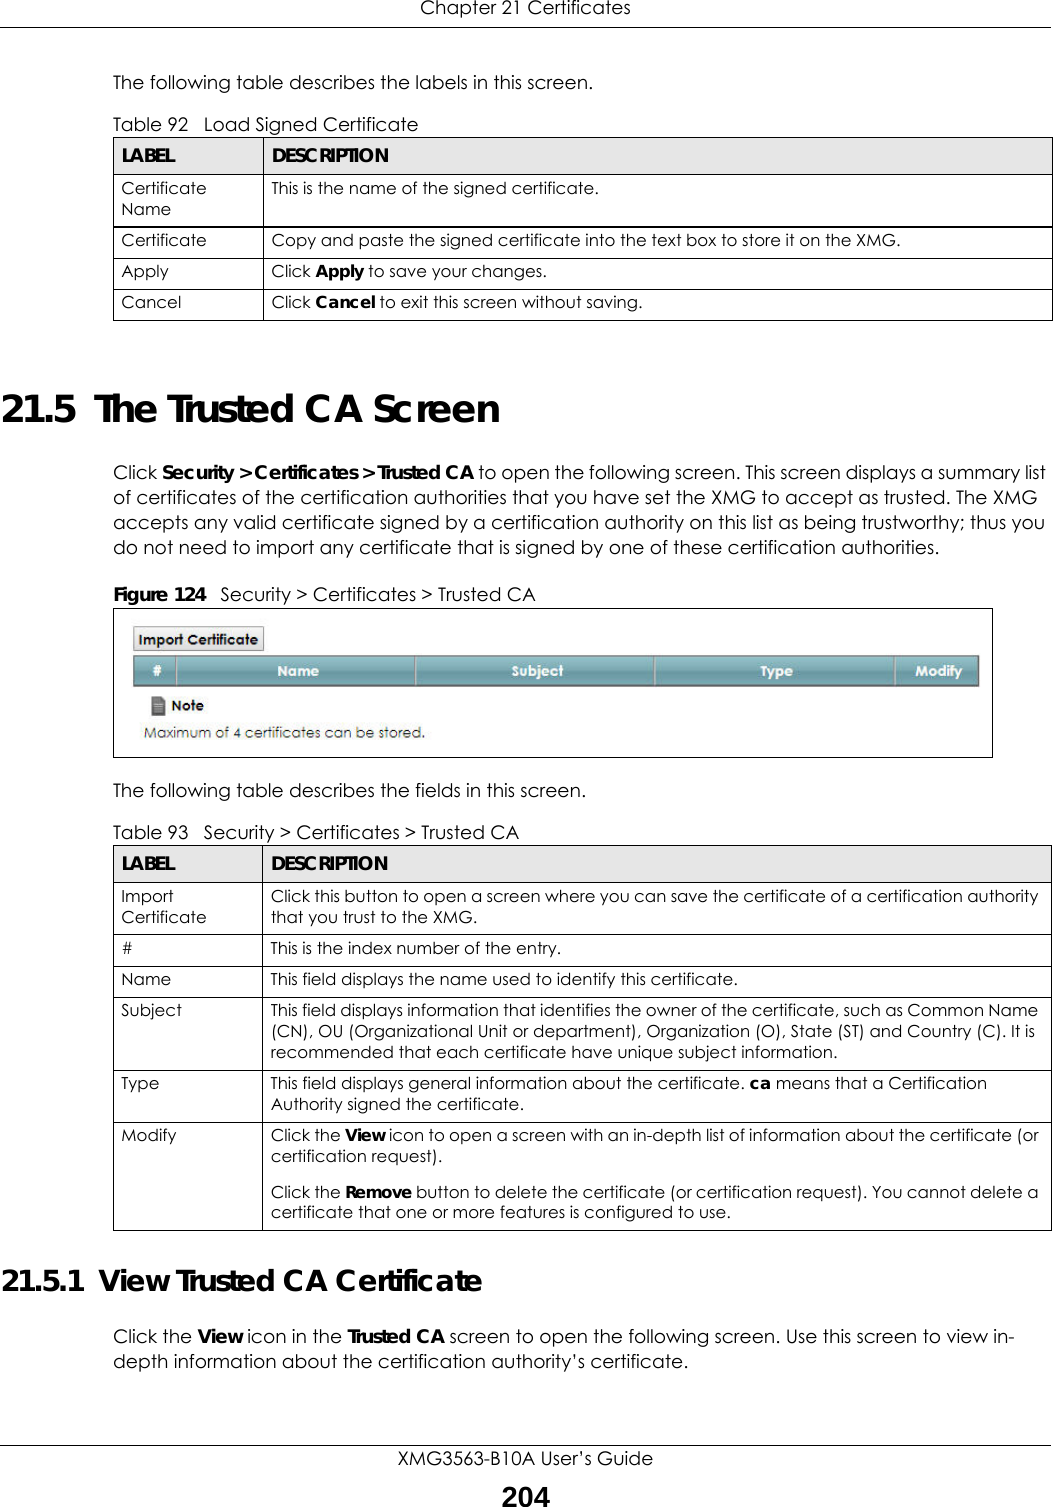 Chapter 21 CertificatesXMG3563-B10A User’s Guide204The following table describes the labels in this screen. 21.5  The Trusted CA ScreenClick Security &gt; Certificates &gt; Trusted CA to open the following screen. This screen displays a summary list of certificates of the certification authorities that you have set the XMG to accept as trusted. The XMG accepts any valid certificate signed by a certification authority on this list as being trustworthy; thus you do not need to import any certificate that is signed by one of these certification authorities. Figure 124   Security &gt; Certificates &gt; Trusted CA The following table describes the fields in this screen. 21.5.1  View Trusted CA CertificateClick the View icon in the Trusted CA screen to open the following screen. Use this screen to view in-depth information about the certification authority’s certificate.Table 92   Load Signed CertificateLABEL DESCRIPTIONCertificate NameThis is the name of the signed certificate. Certificate Copy and paste the signed certificate into the text box to store it on the XMG.Apply Click Apply to save your changes.Cancel Click Cancel to exit this screen without saving.Table 93   Security &gt; Certificates &gt; Trusted CALABEL DESCRIPTIONImport CertificateClick this button to open a screen where you can save the certificate of a certification authority that you trust to the XMG.# This is the index number of the entry.Name This field displays the name used to identify this certificate. Subject This field displays information that identifies the owner of the certificate, such as Common Name (CN), OU (Organizational Unit or department), Organization (O), State (ST) and Country (C). It is recommended that each certificate have unique subject information.Type This field displays general information about the certificate. ca means that a Certification Authority signed the certificate. Modify Click the View icon to open a screen with an in-depth list of information about the certificate (or certification request).Click the Remove button to delete the certificate (or certification request). You cannot delete a certificate that one or more features is configured to use.